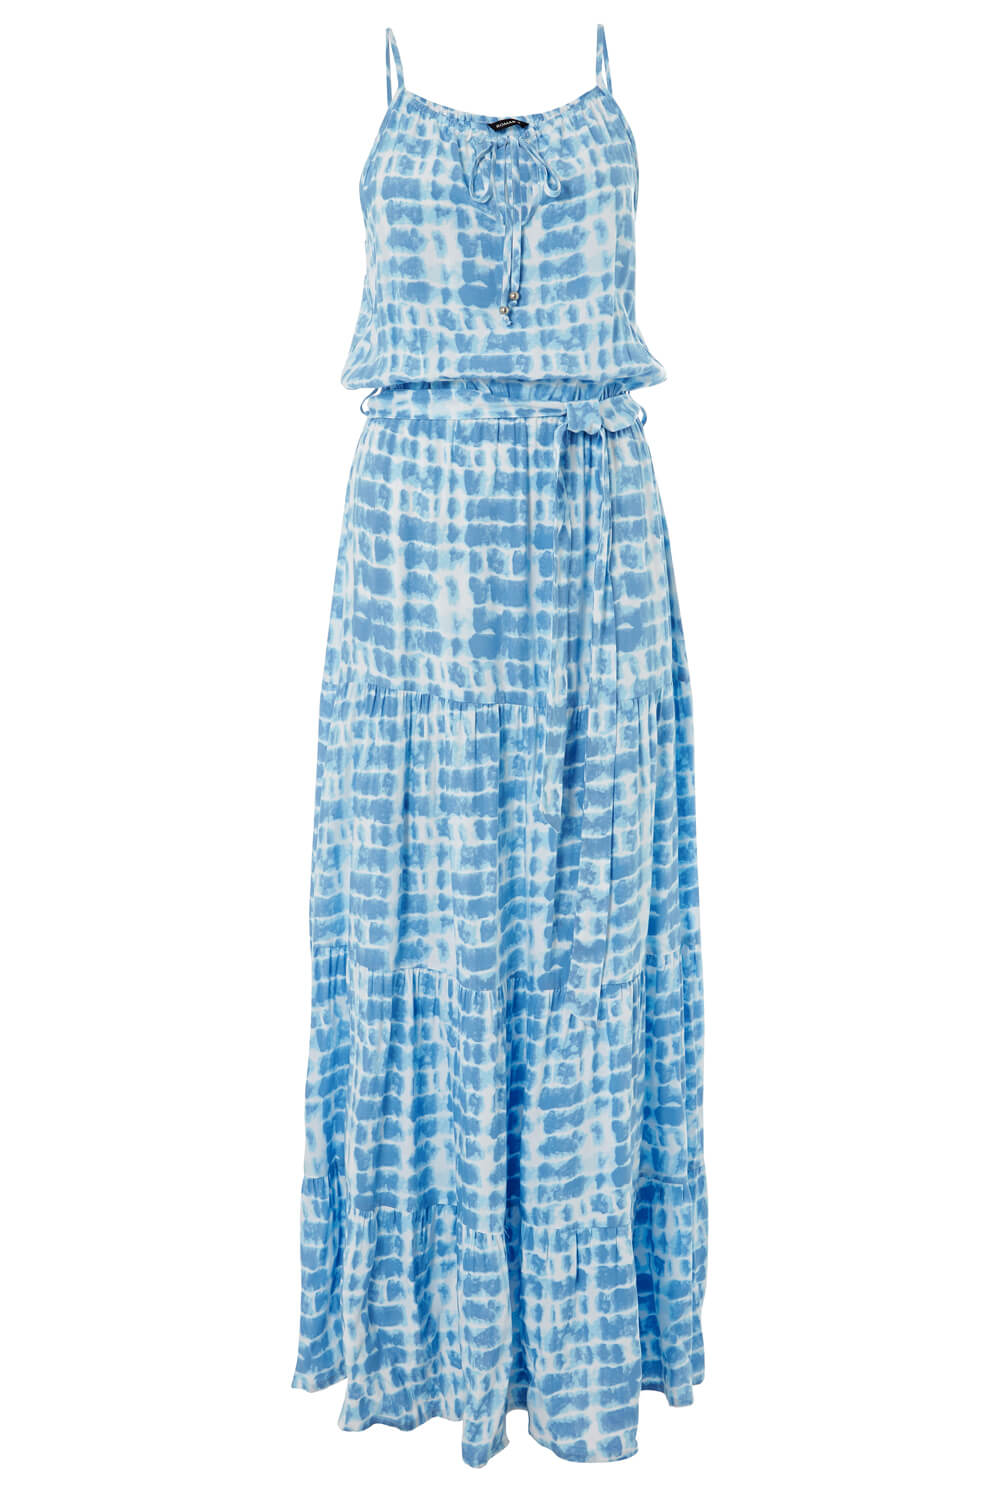 Blue Tie Dye Tiered Maxi Dress, Image 4 of 4